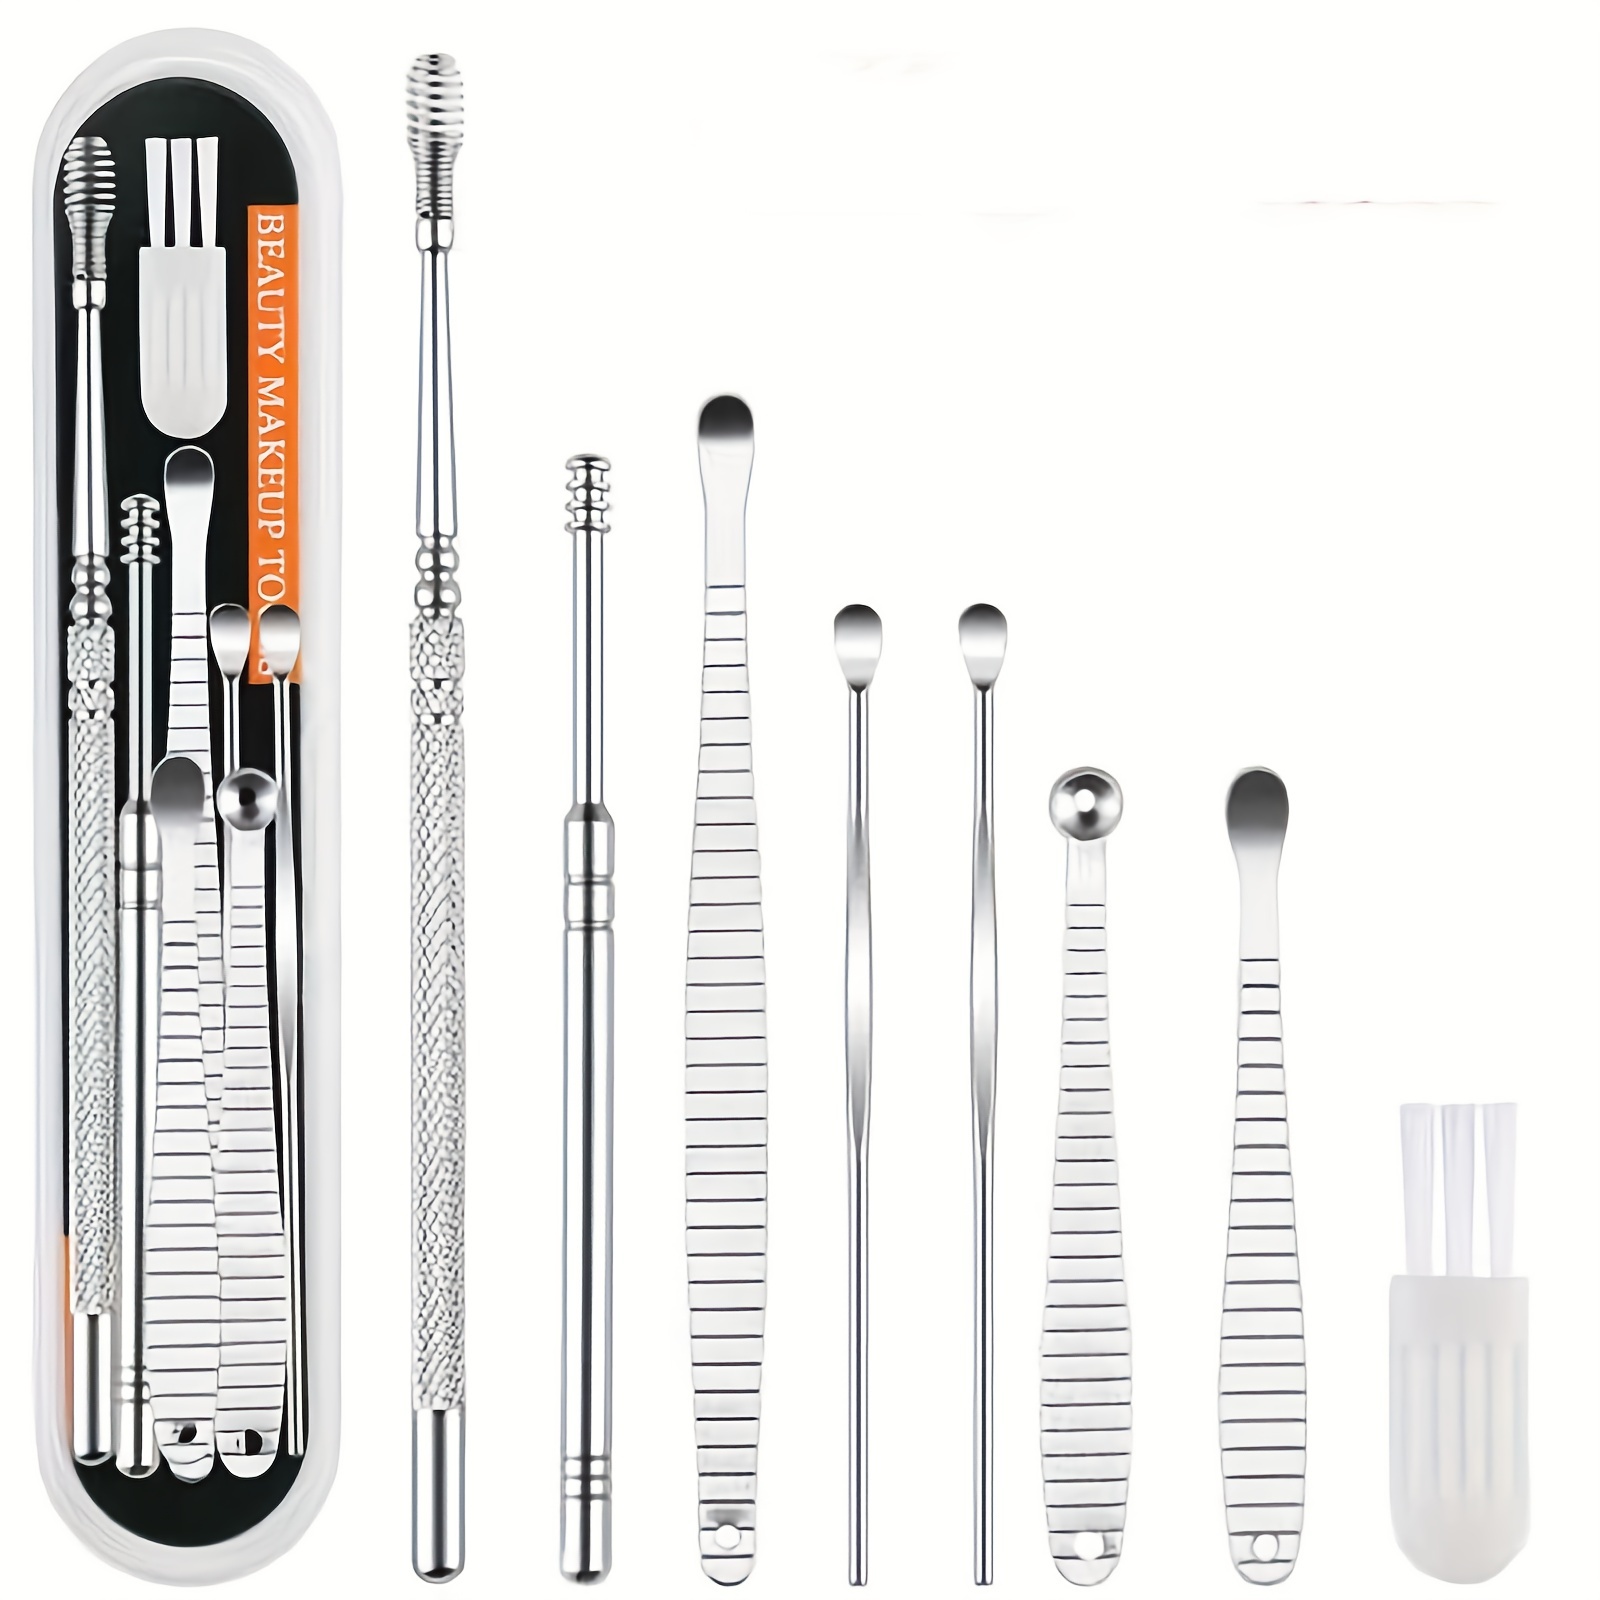 Rsentera 6 Pcs Ear Cleaner Tool Kit with a Storage Box Ear Wax Removal  Curette Kit, Ear Cleaning Tool Set, Stainless Steel Ear Wax Remover Tool,  Ear